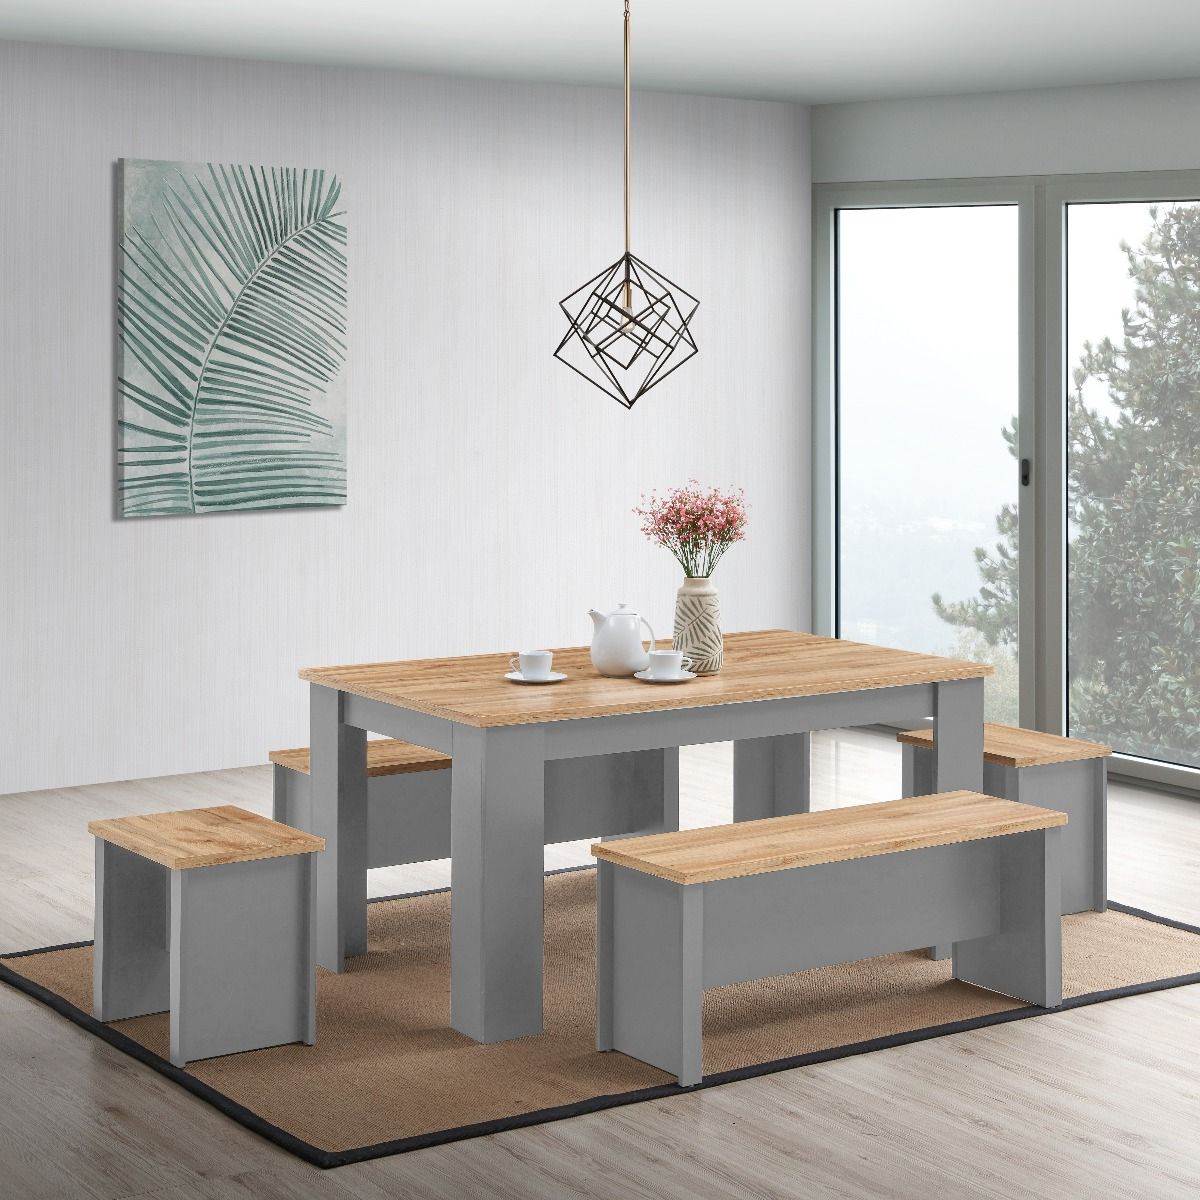 Cisnon Light Grey Dining Table 150 Cm With 2 Benches 2 Stools Light Grey